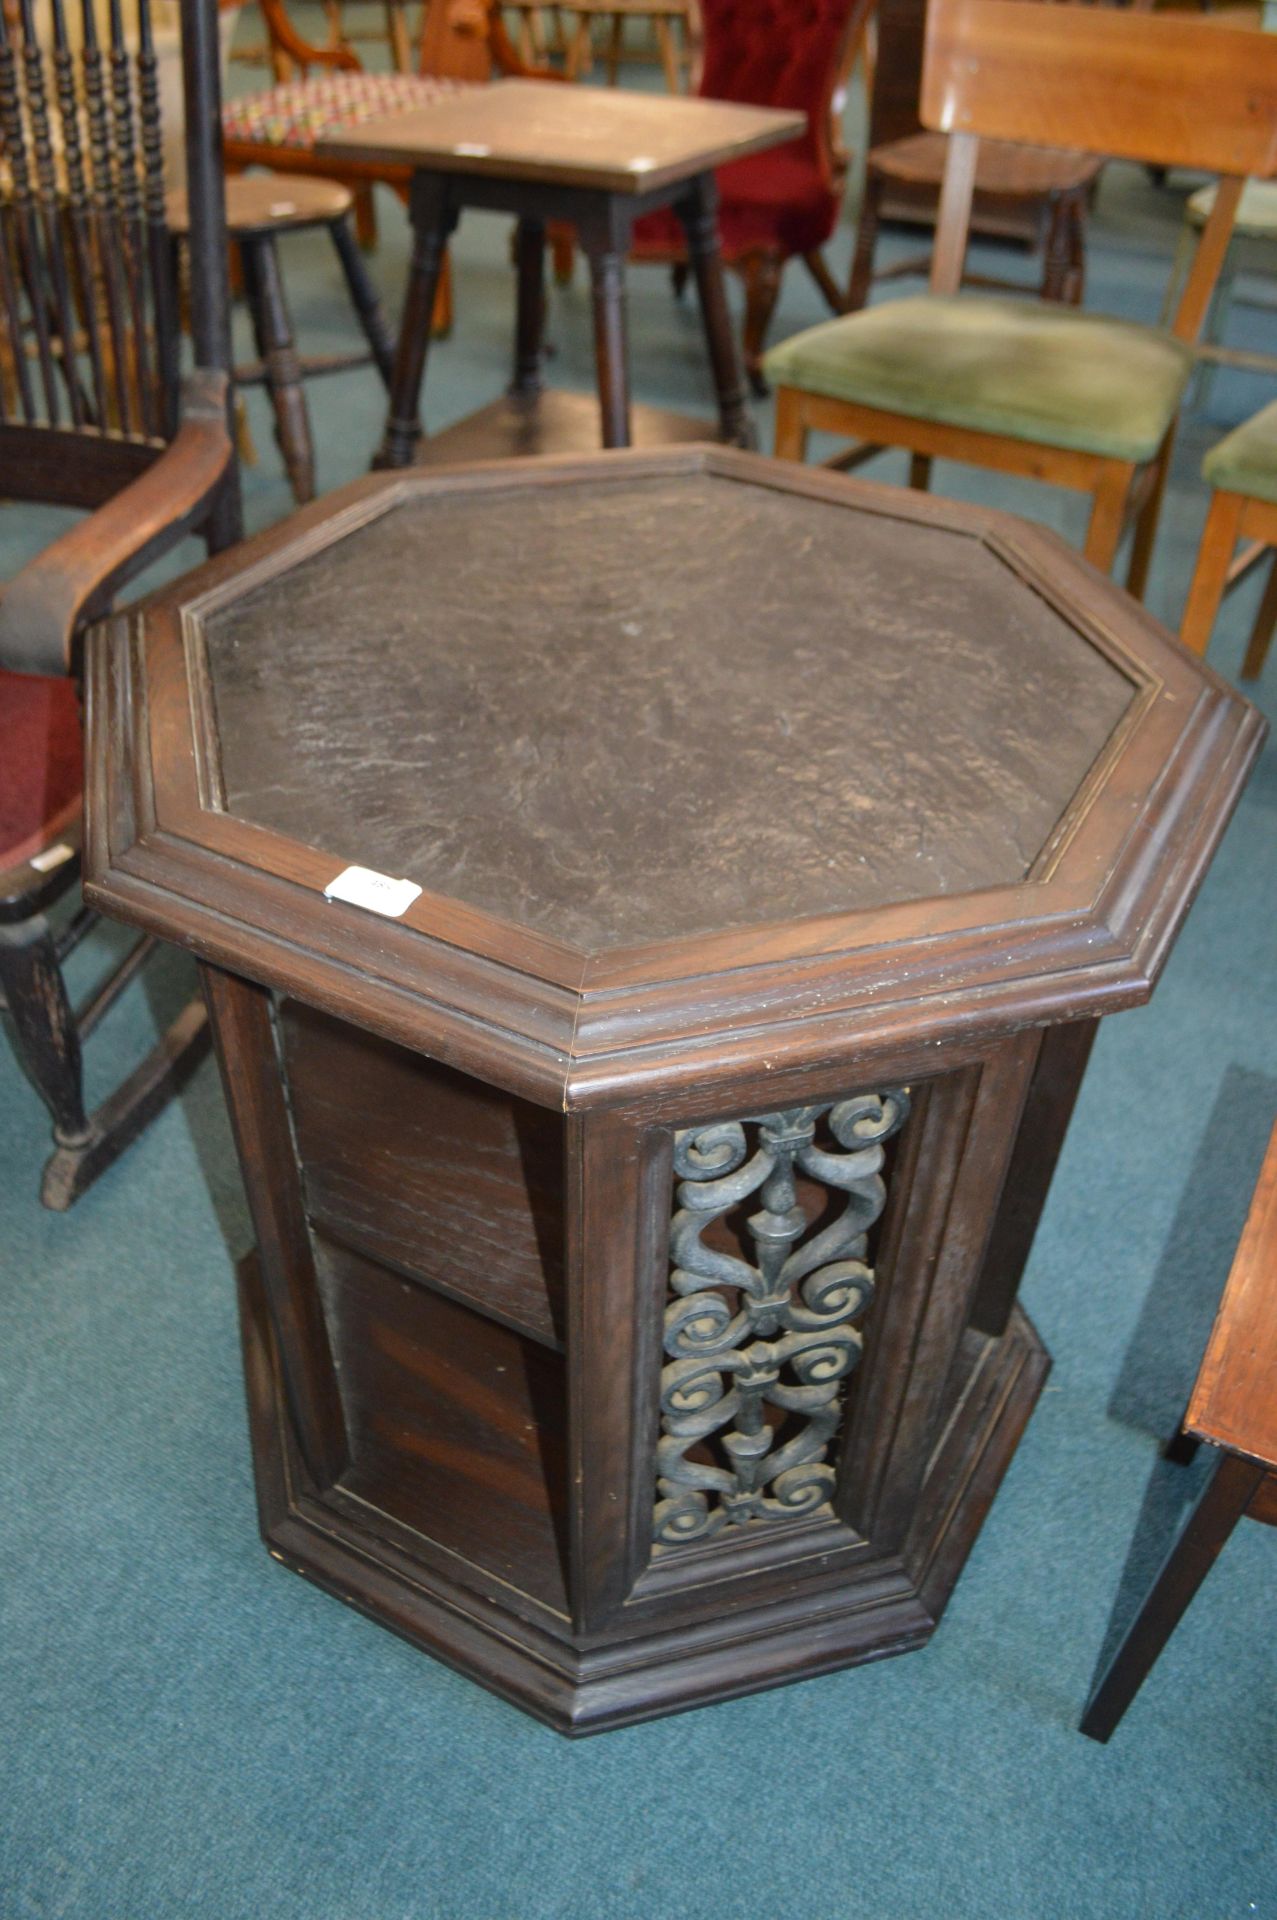 Octagonal Canadian Storage Table by Deiel Craft, C - Image 2 of 4